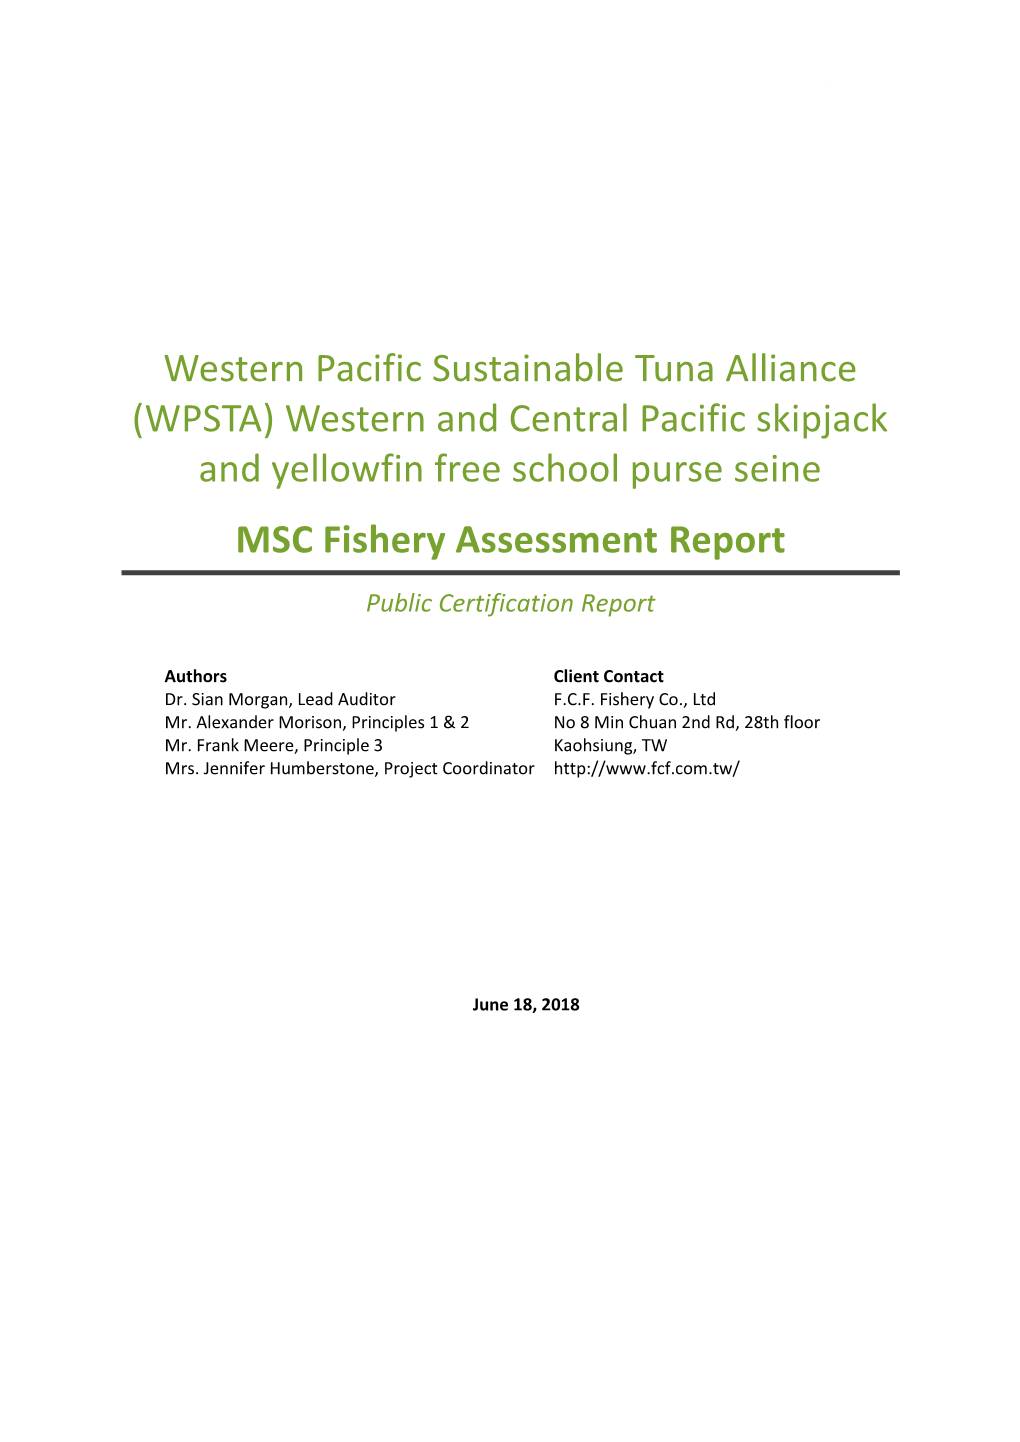 (WPSTA) Western and Central Pacific Skipjack and Yellowfin Free School Purse Seine MSC Fishery Assessment Report